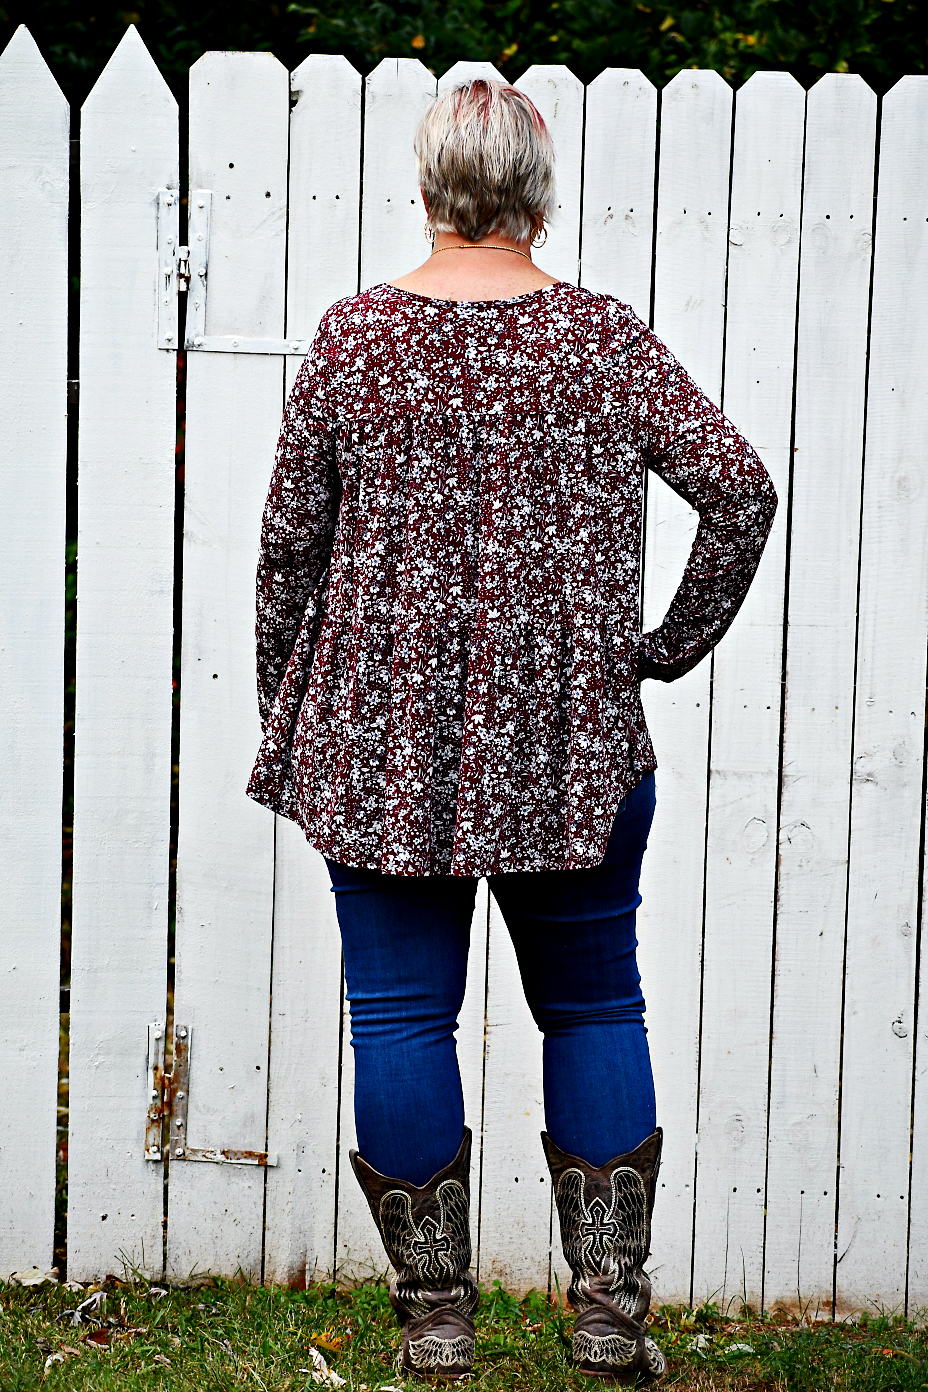 Long Sleeve Tiered Floral Top in Burgundy